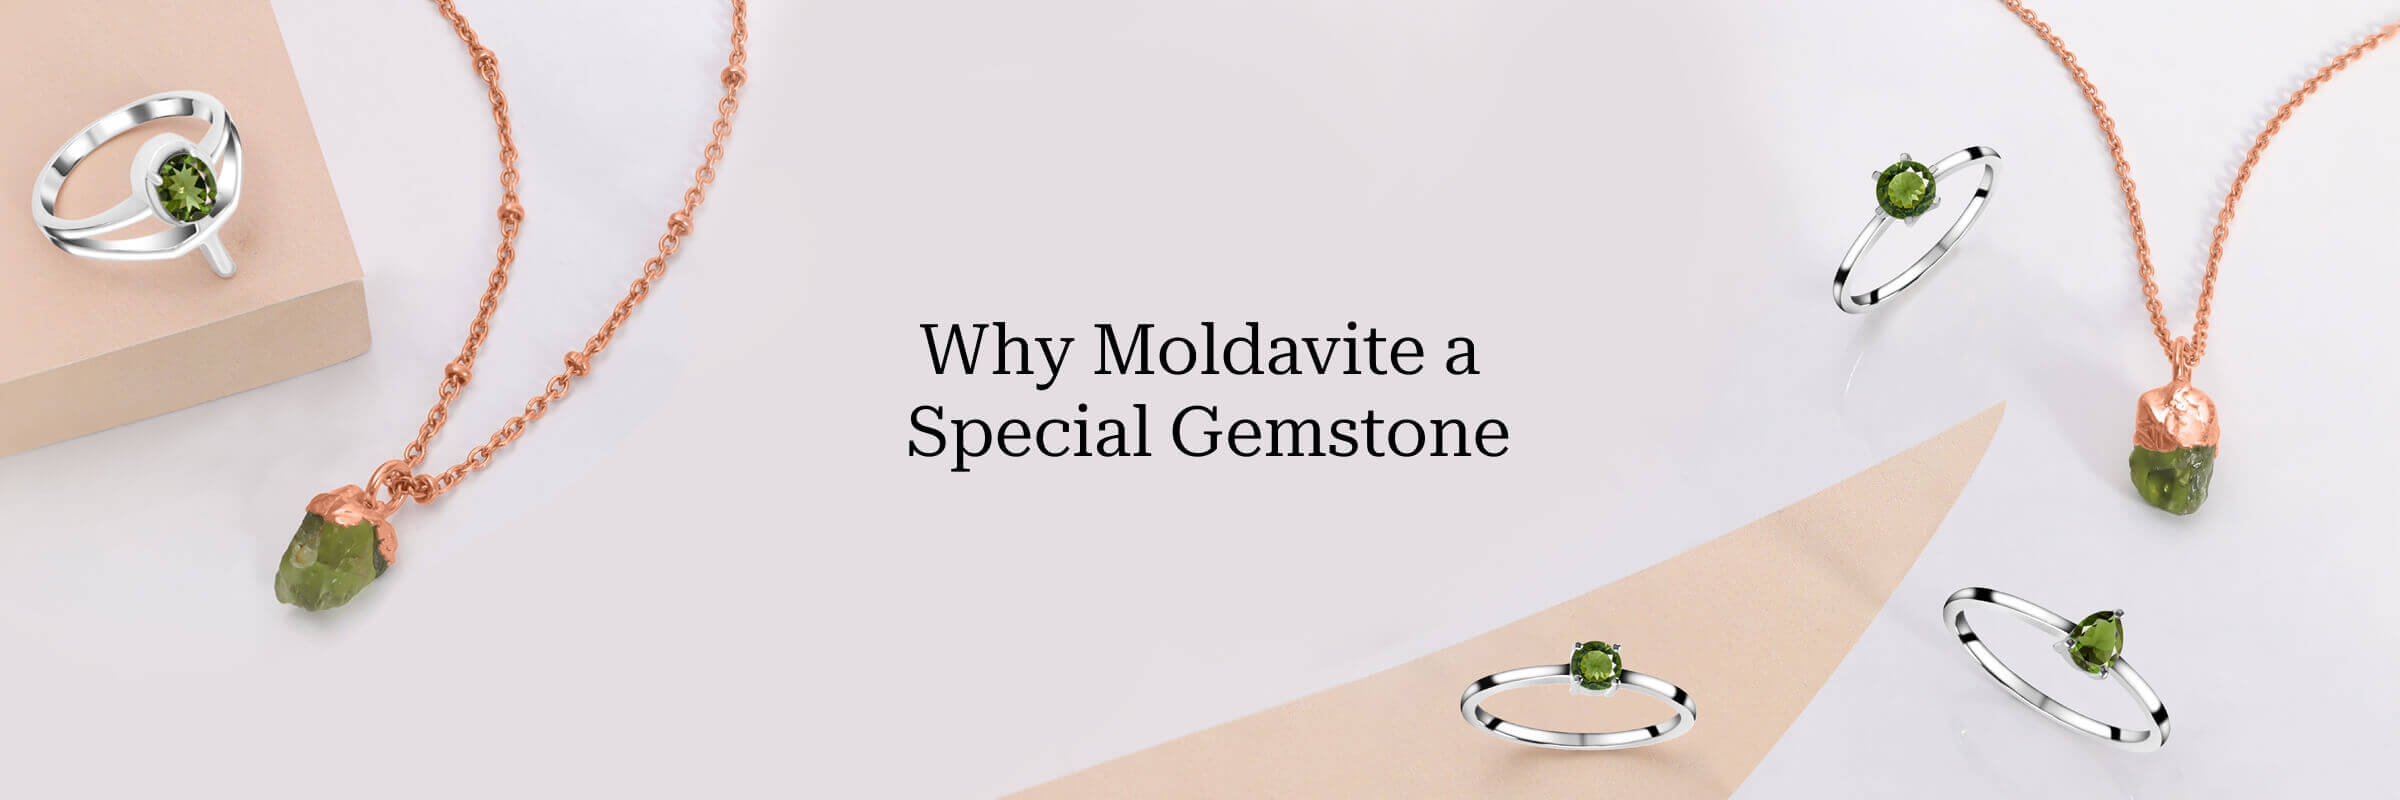 What Are The Things That Make Moldavite Jewelry Special